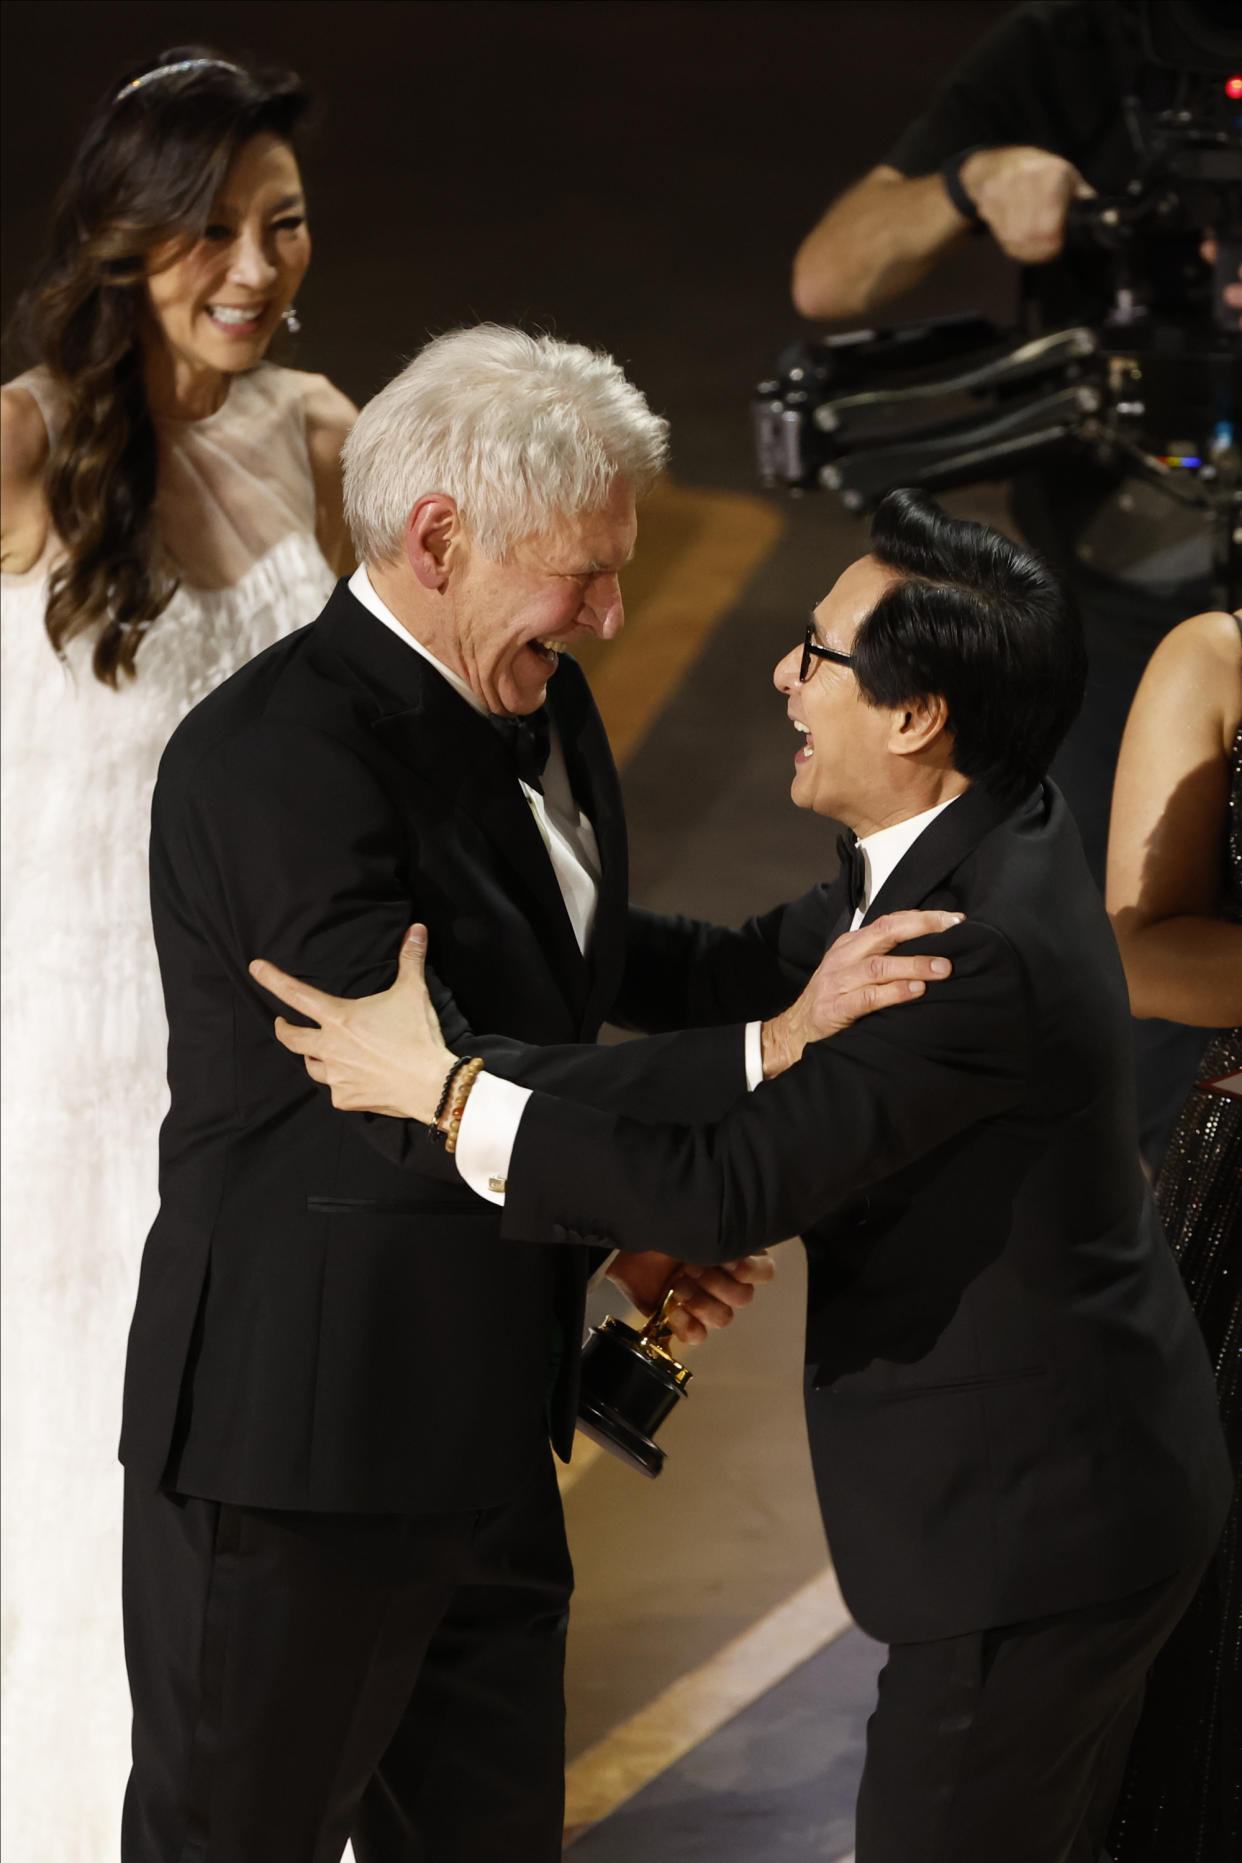 THE OSCARS® - The 95th Oscars® will air live from the Dolby® Theatre at Ovation Hollywood on ABC and broadcast outlets worldwide on Sunday, March 12, 2023, at 8 p.m. EDT/5 p.m. PDT. (ABC)
HARRISON FORD, KE HUY QUAN